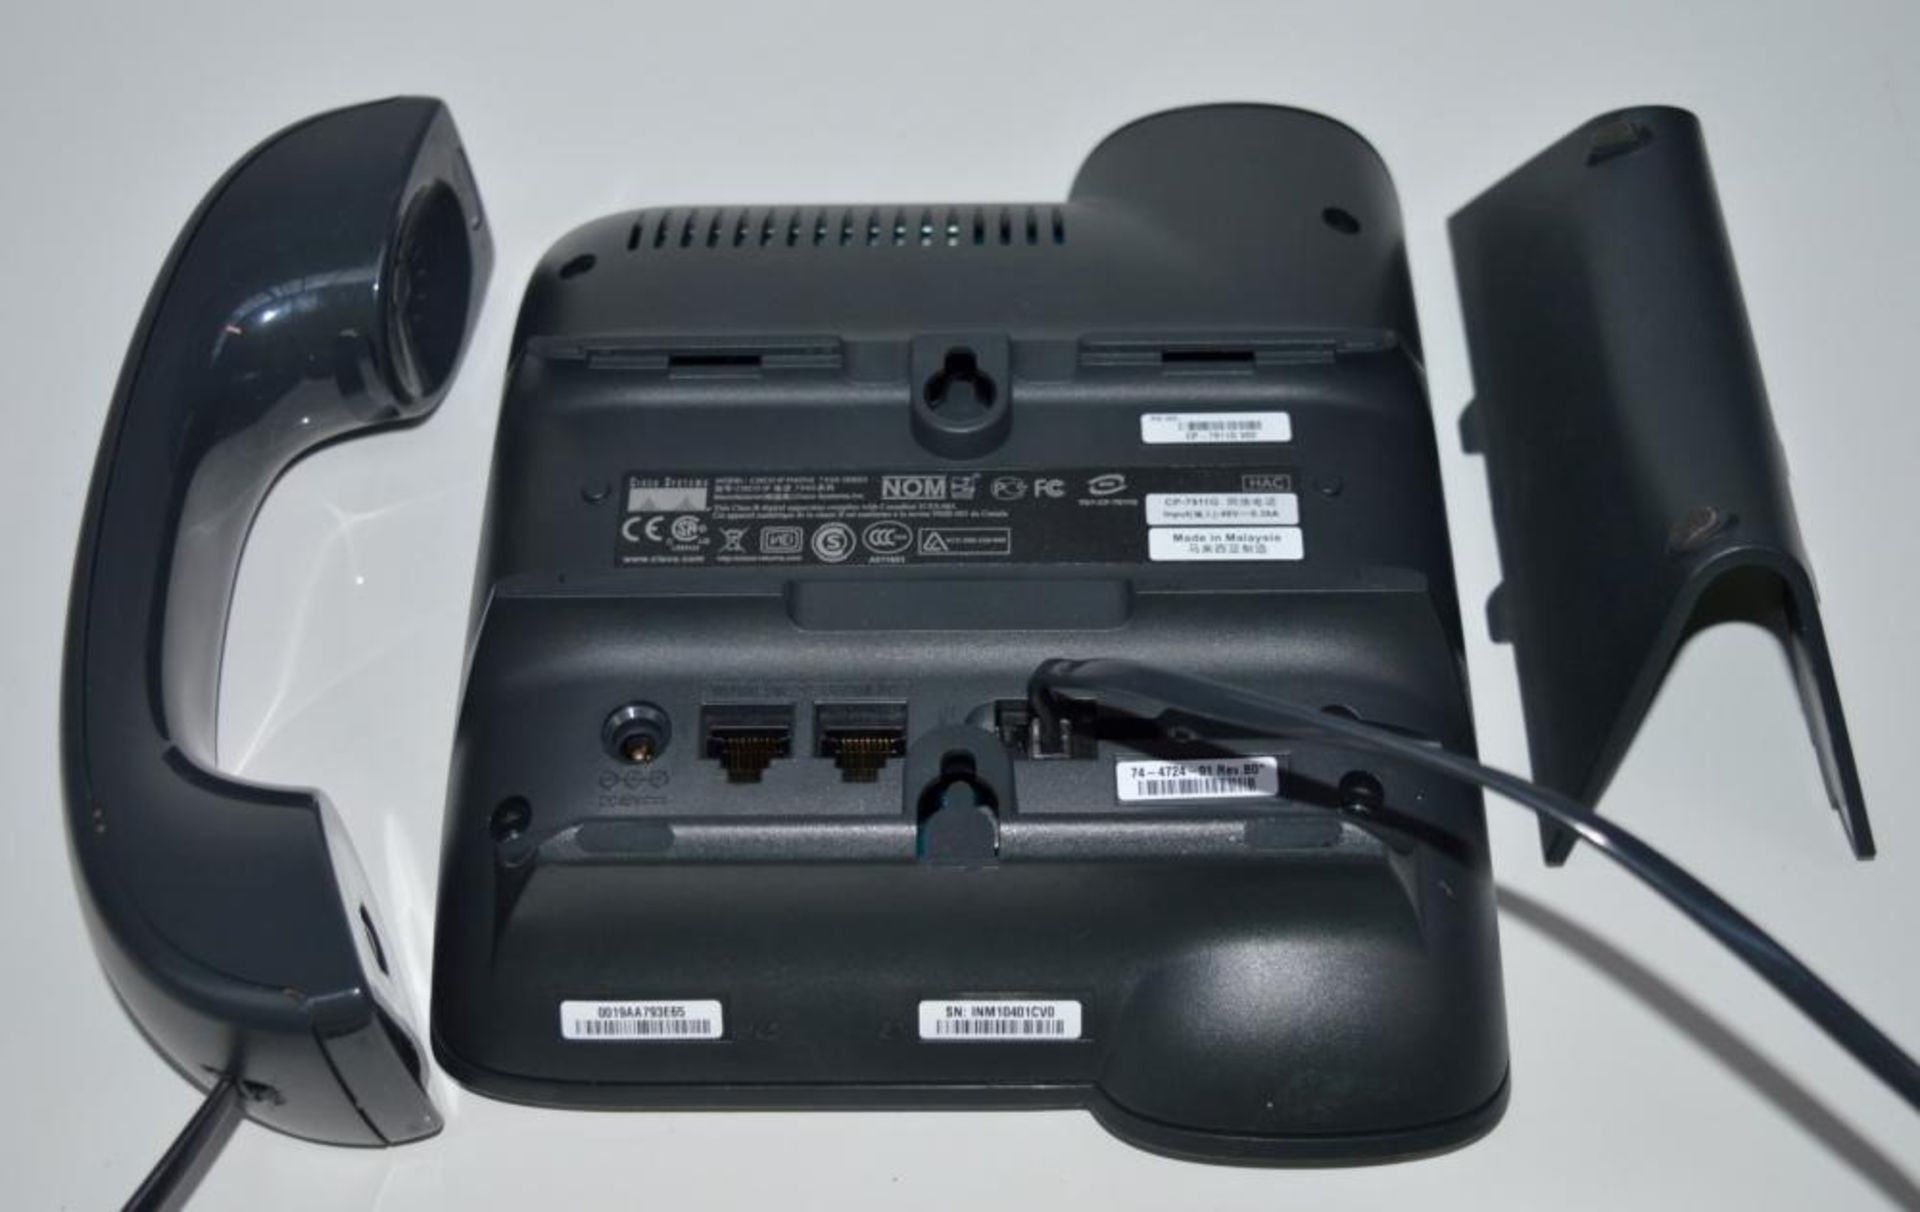 4 x Cisco CP-7911G Unified IP SIP Phones - Removed From a Working Office Environment in Good Conditi - Image 5 of 8